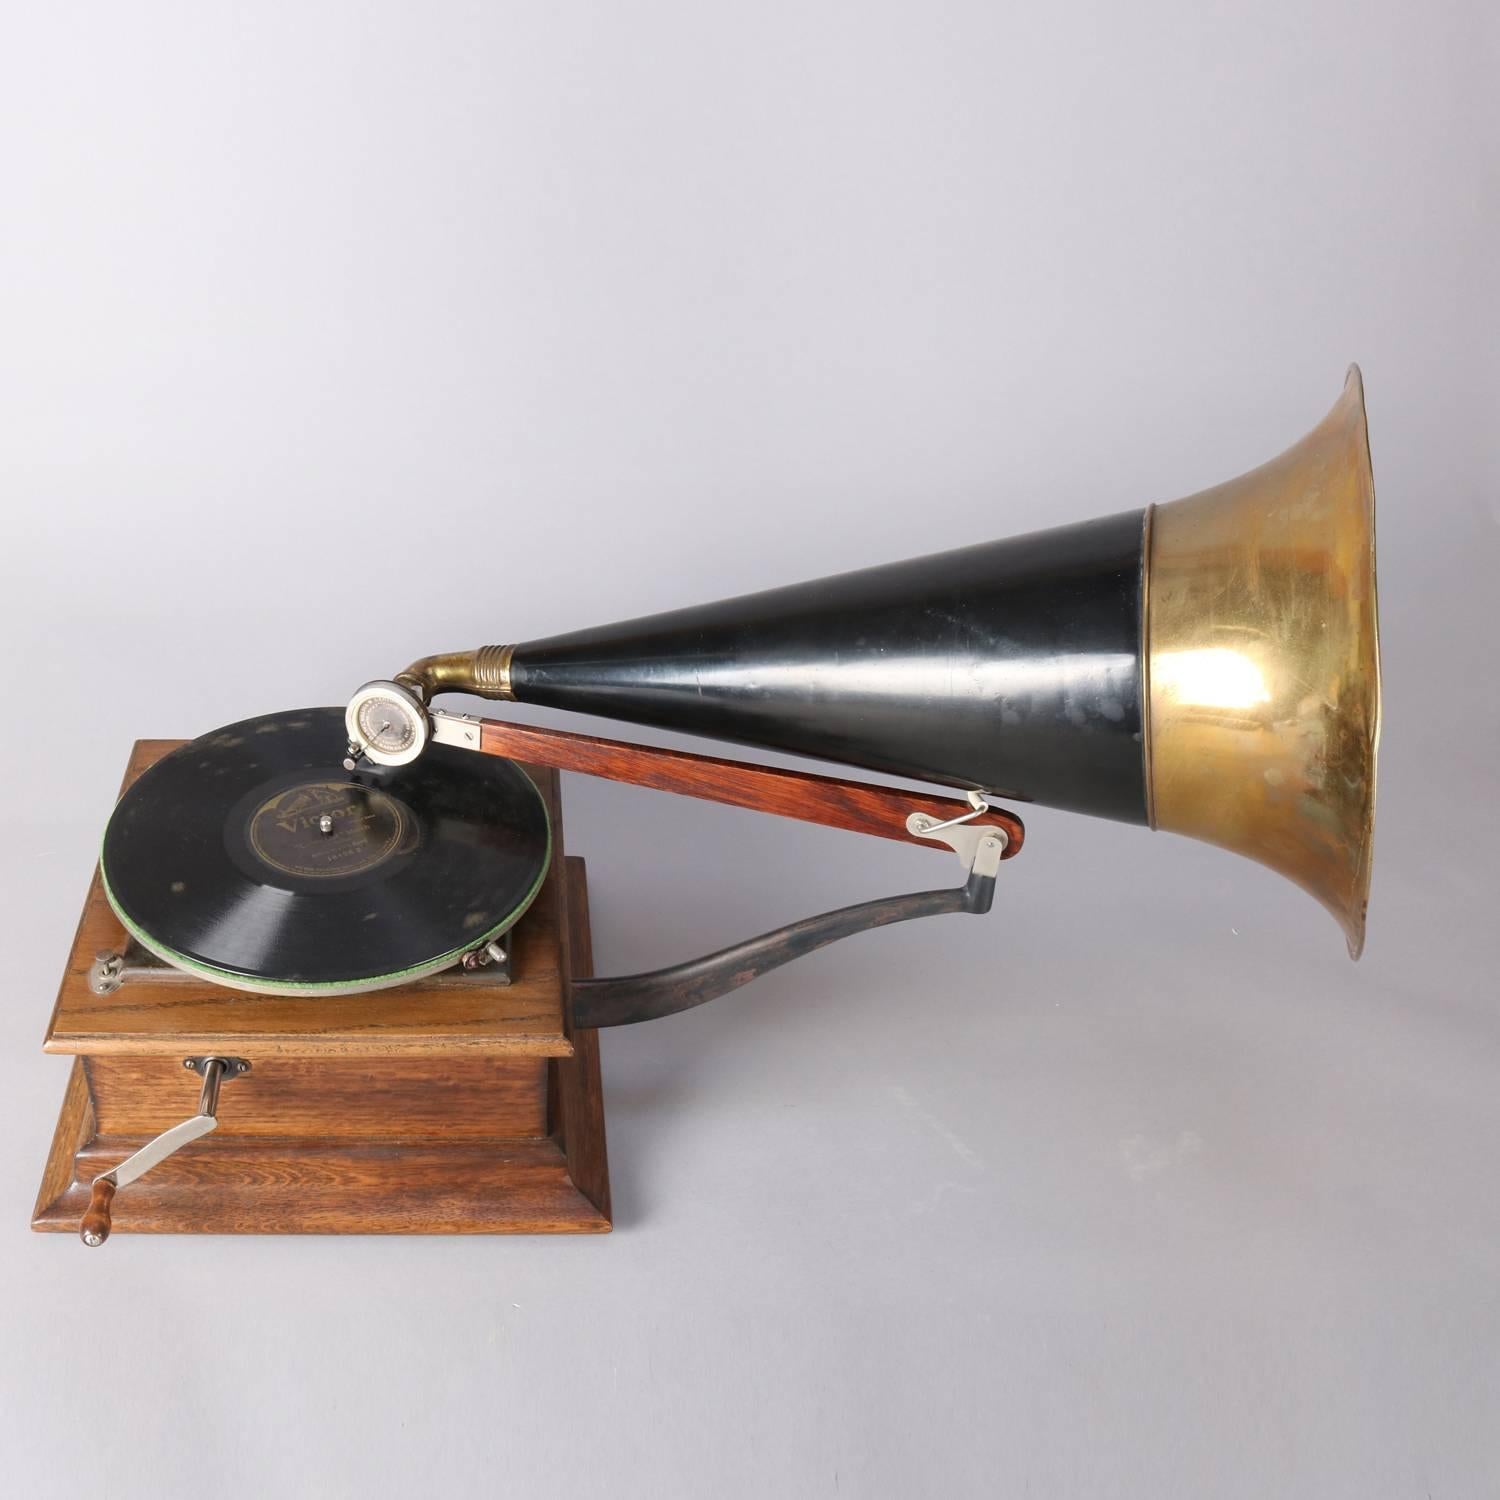 Antique tabletop Victor talking machine phonograph type P. 6858 features oak case, exterior ebonized and brass Horn, original label and metal plaque, working condition, early 20th century

Measures:  20